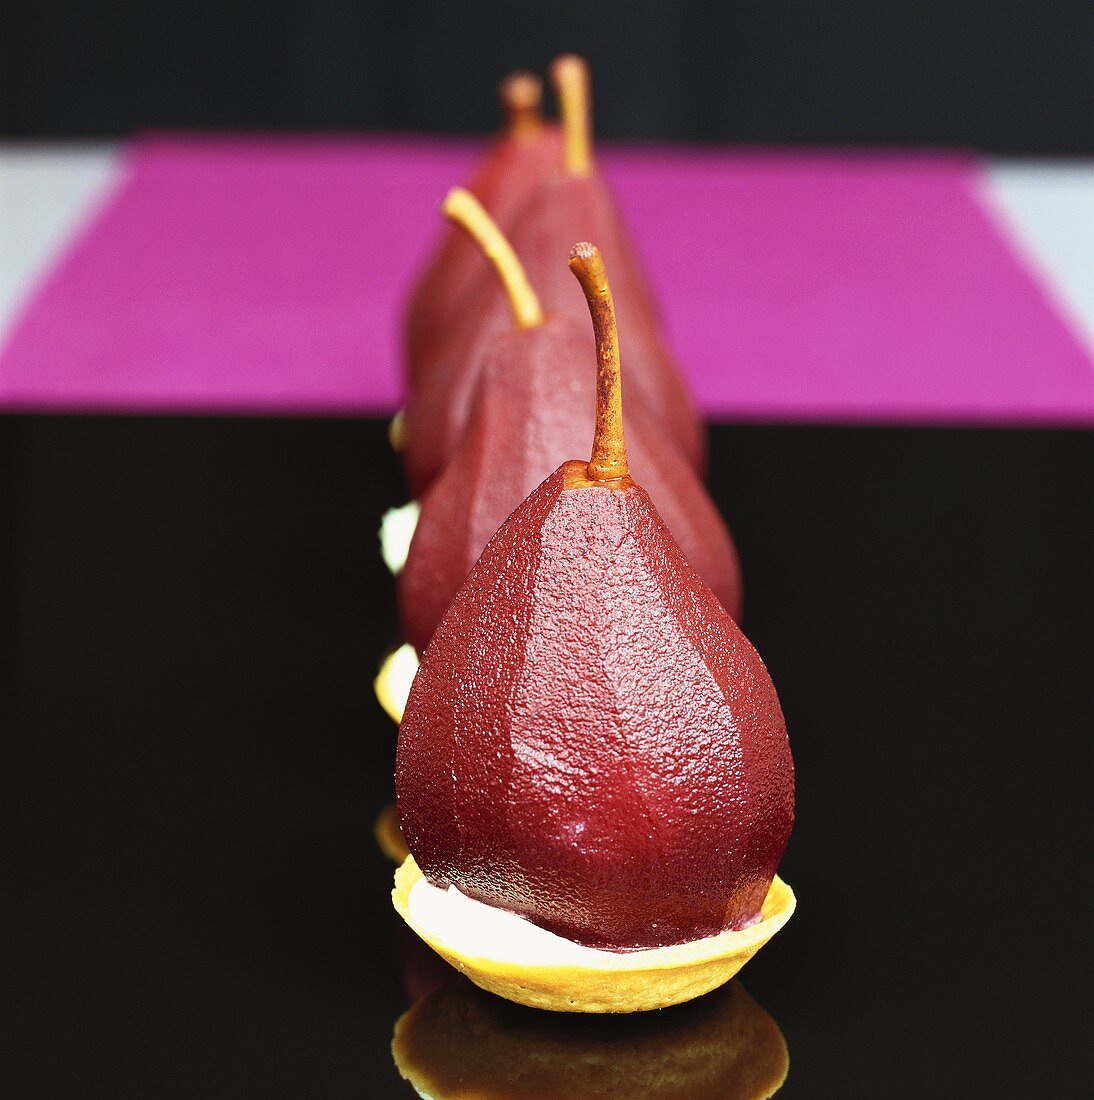 Pears poached in red wine on tart cases